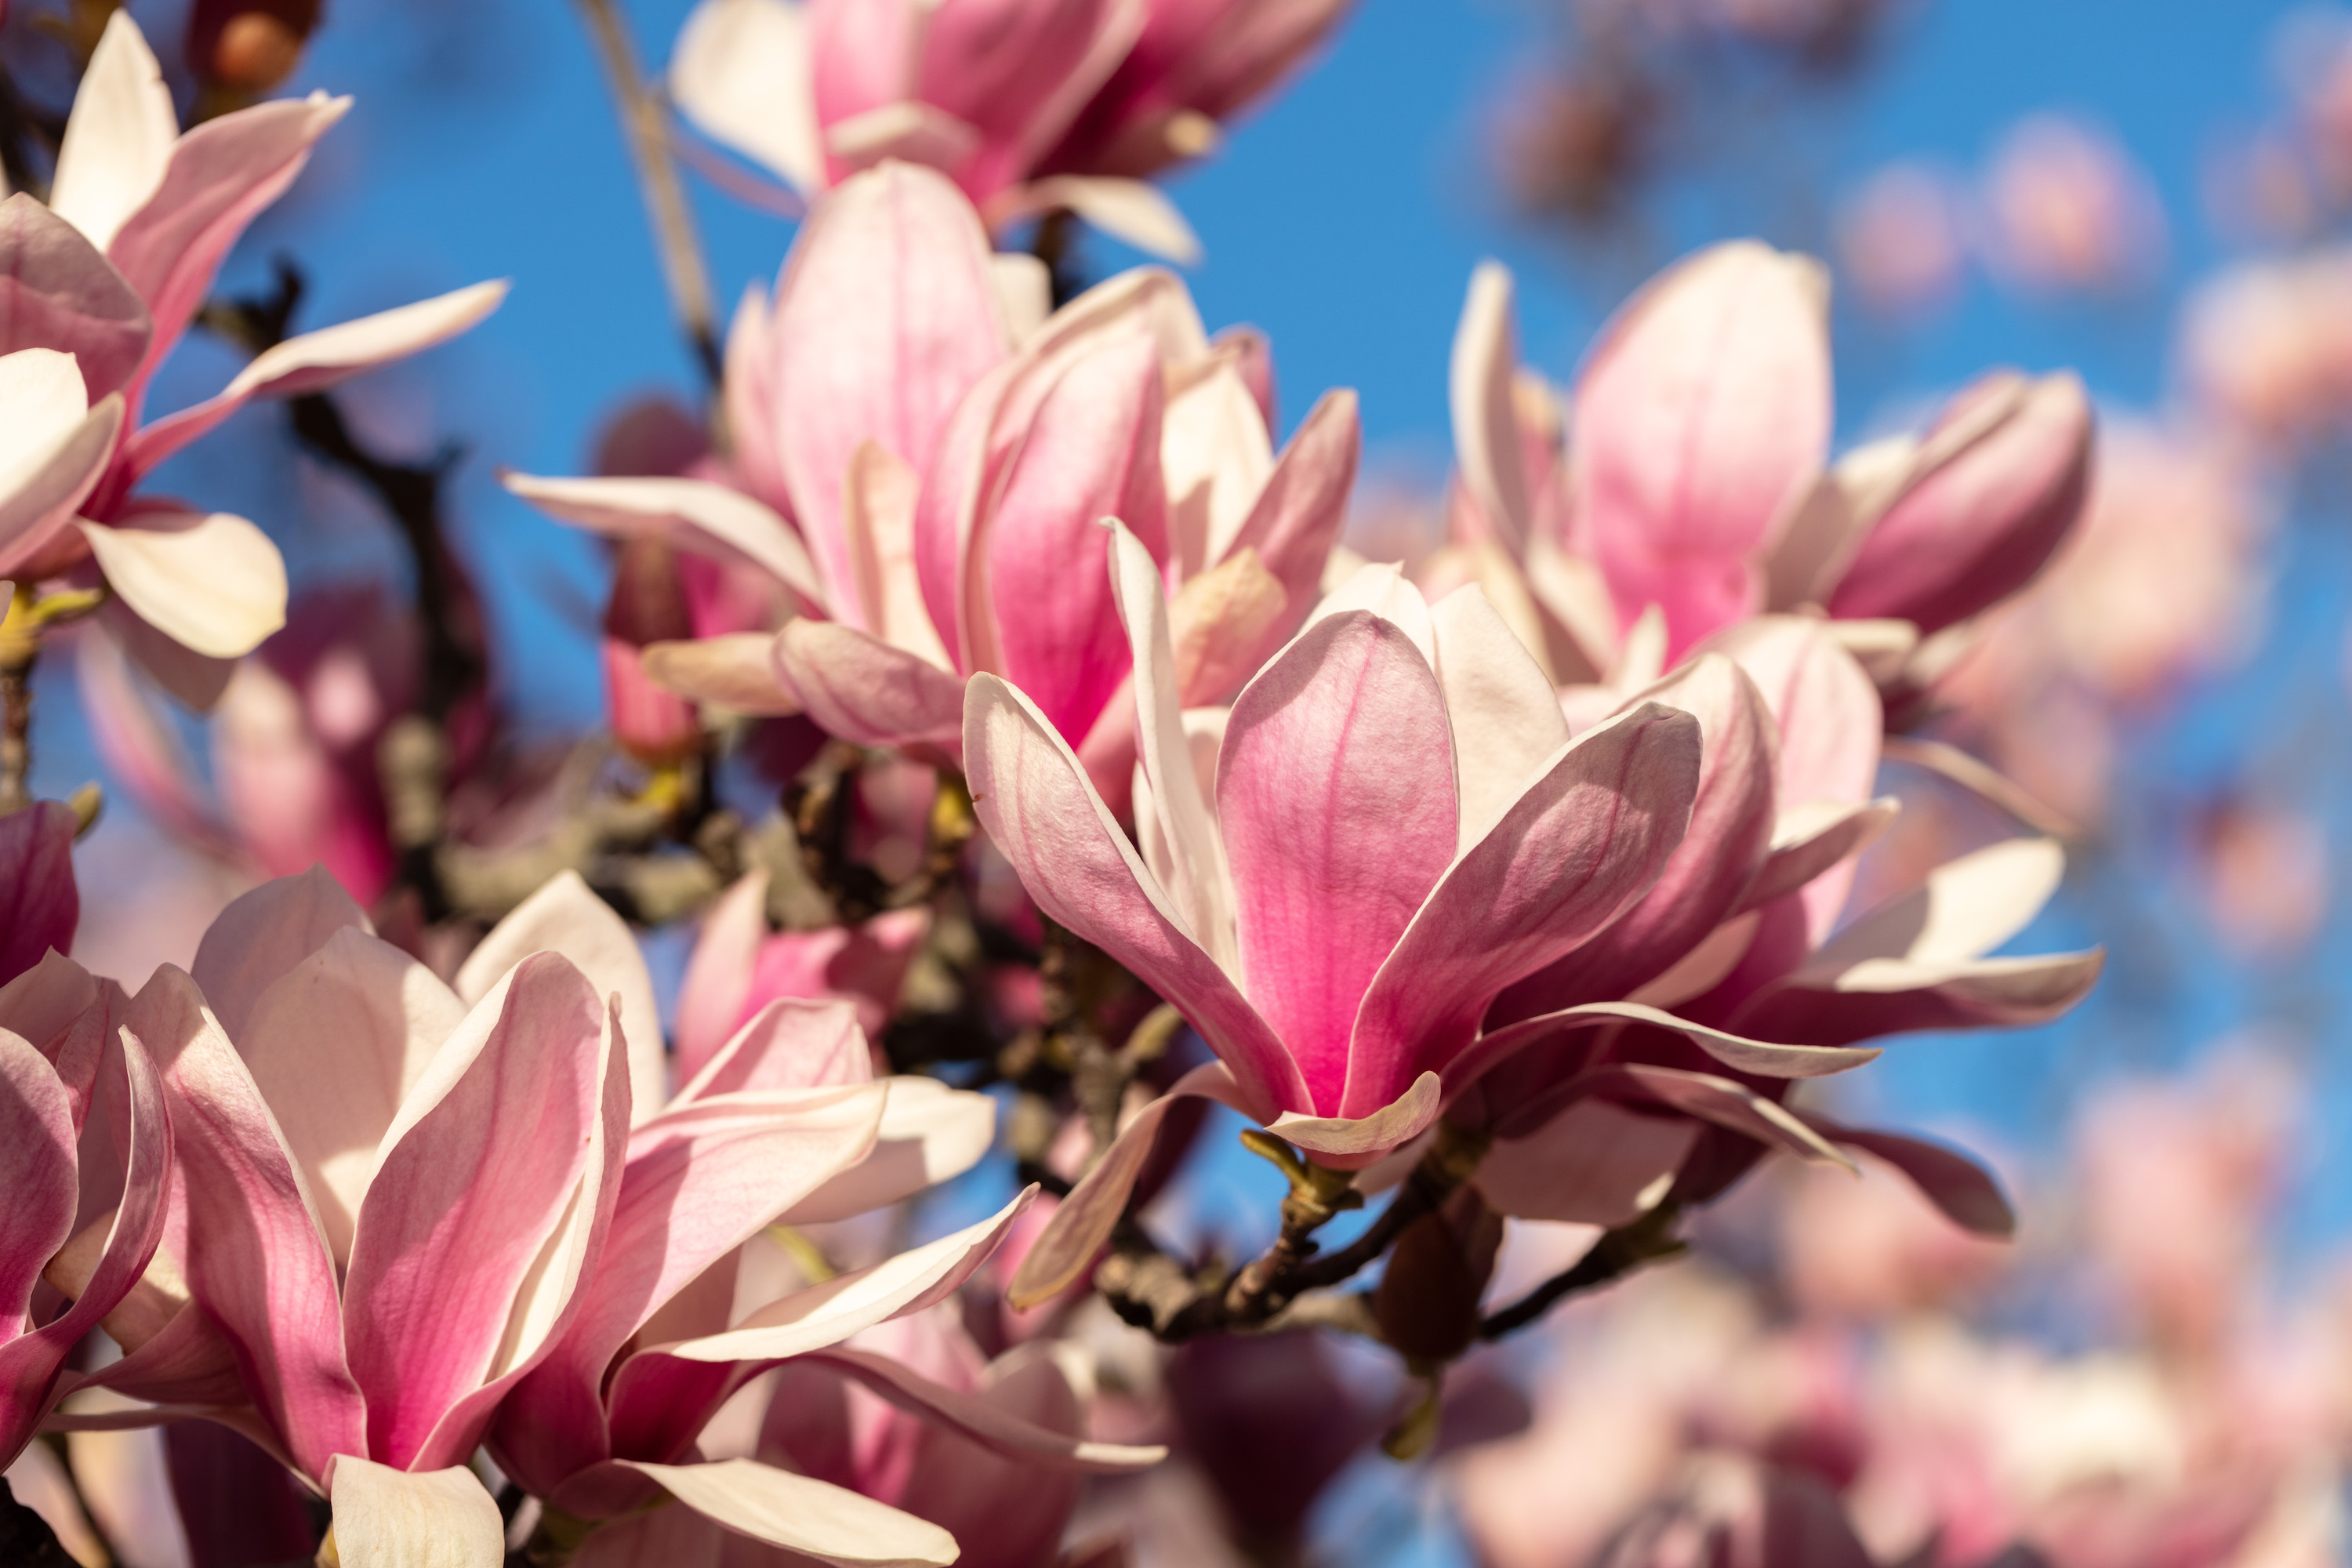 Get to Know the Magnolias pic